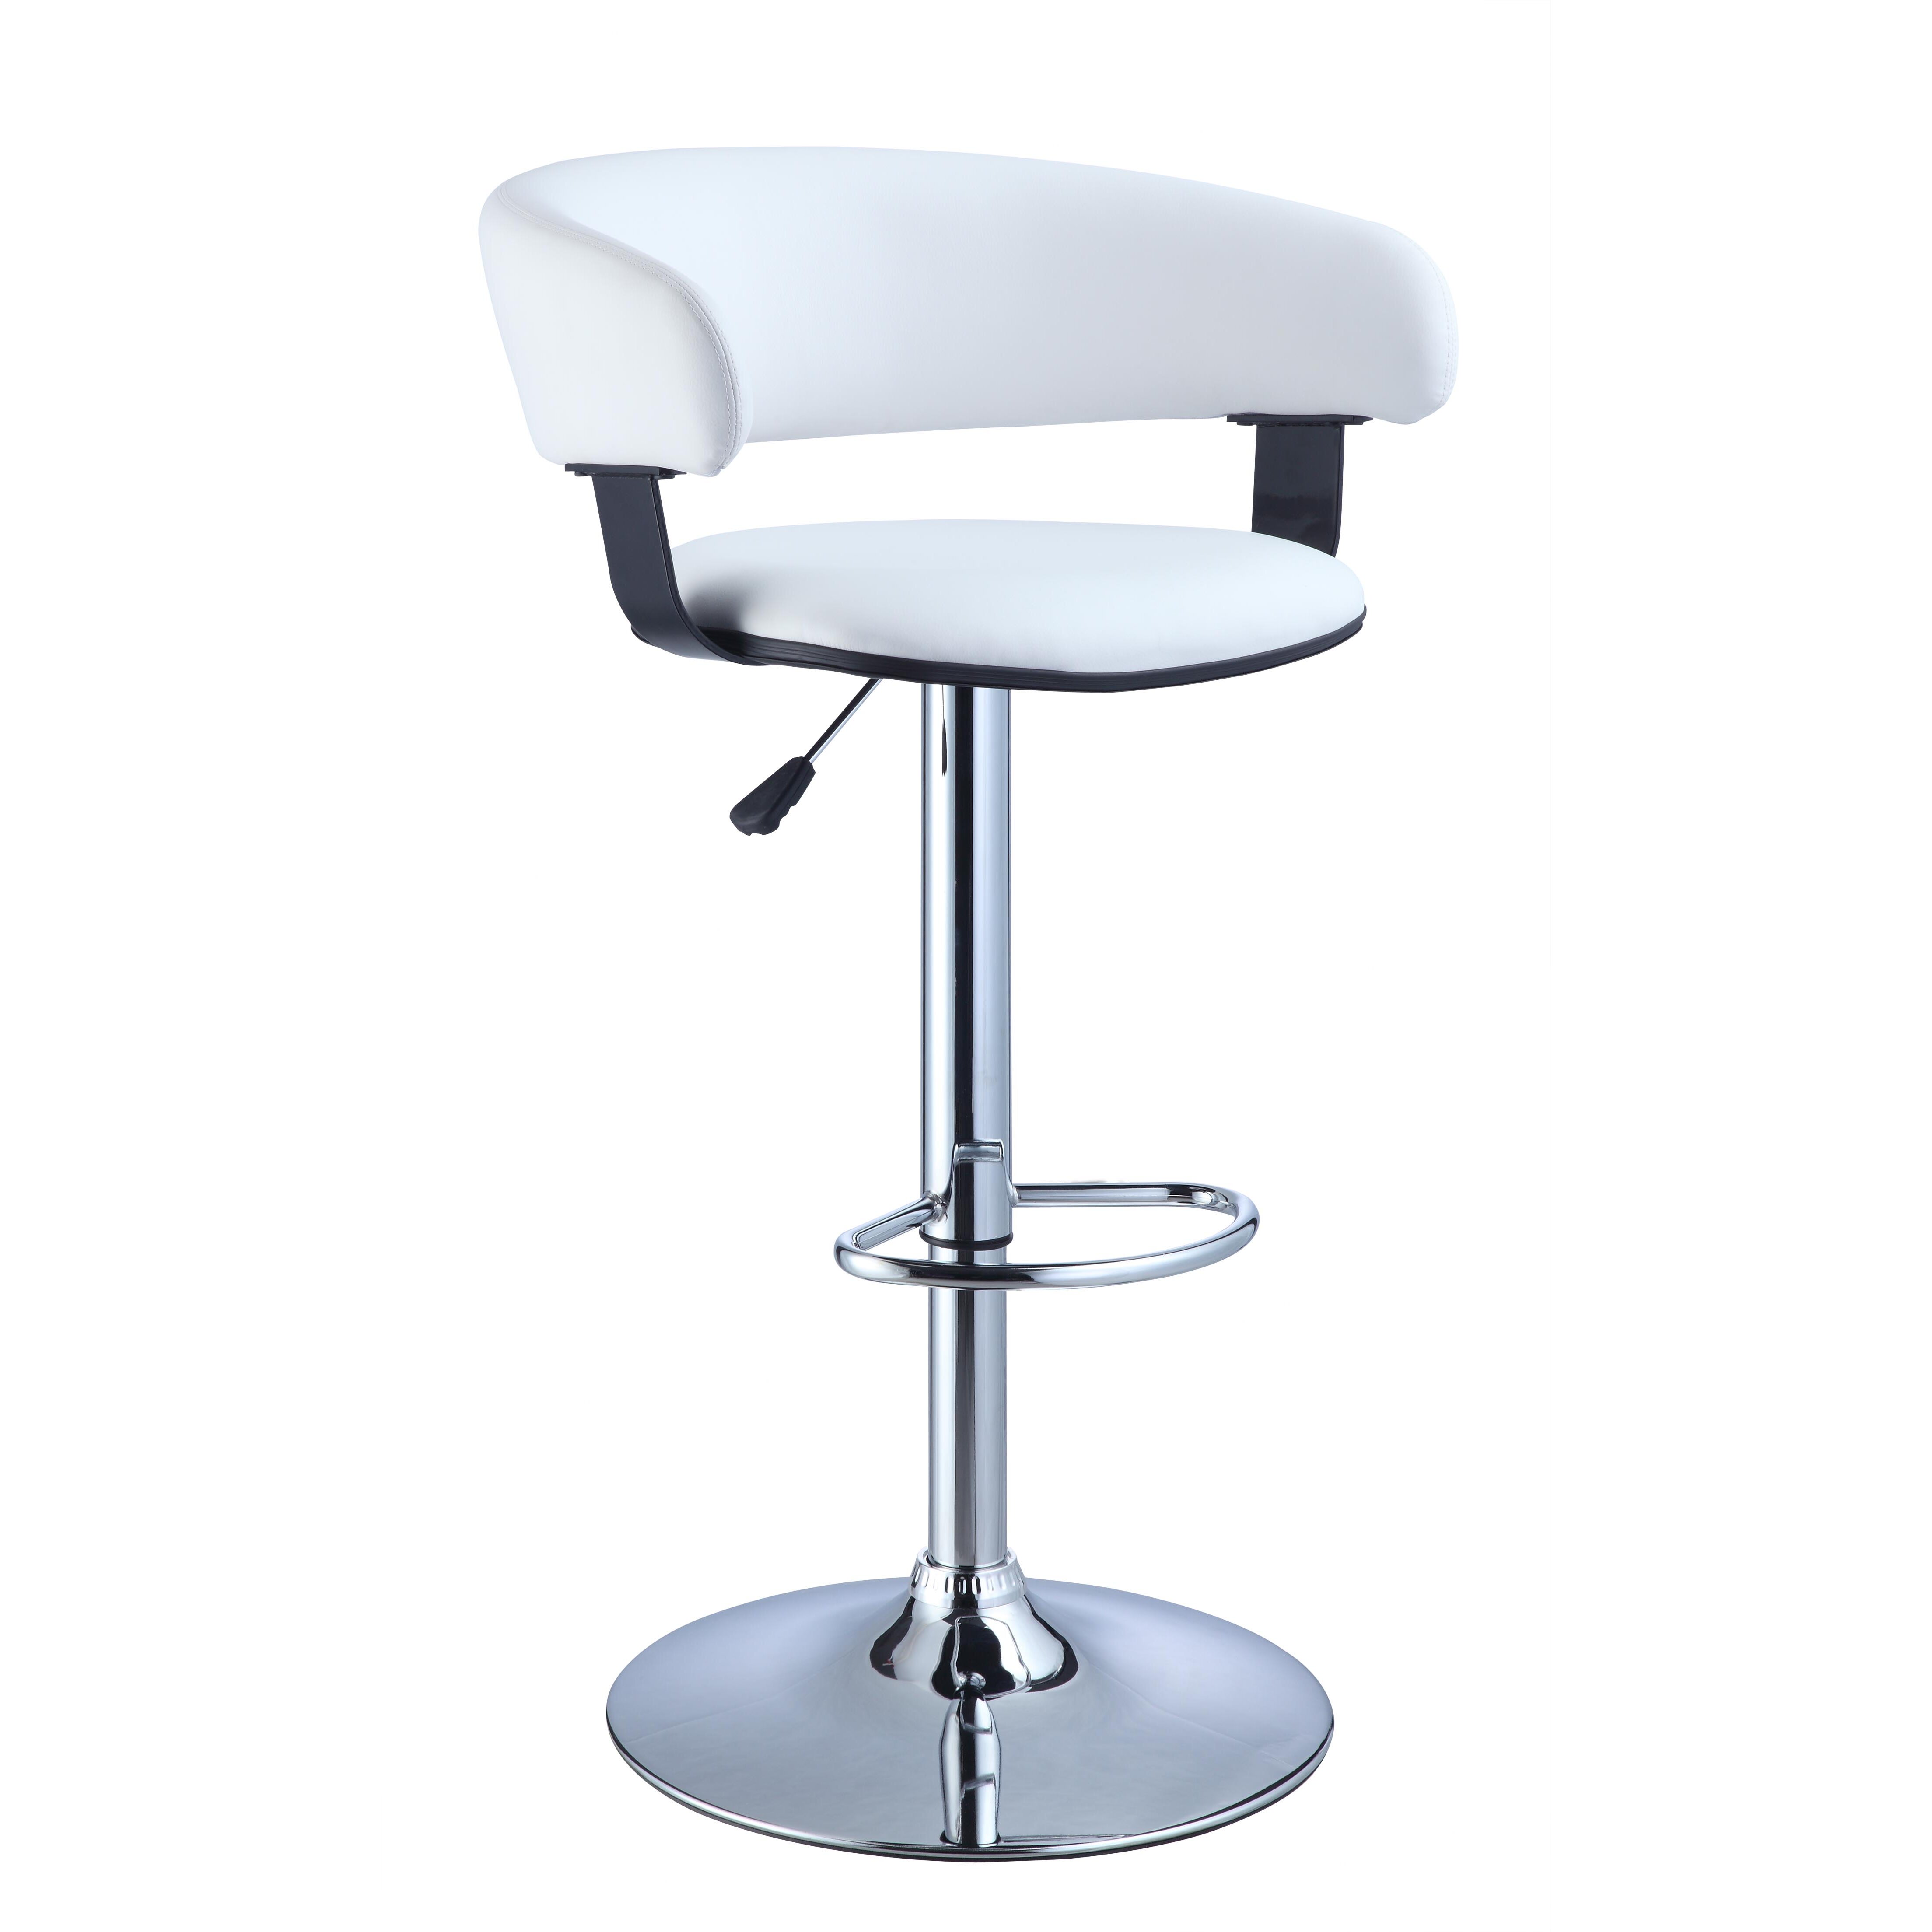 Amazing Adjustable Height Bar Stools in the world Learn more here 